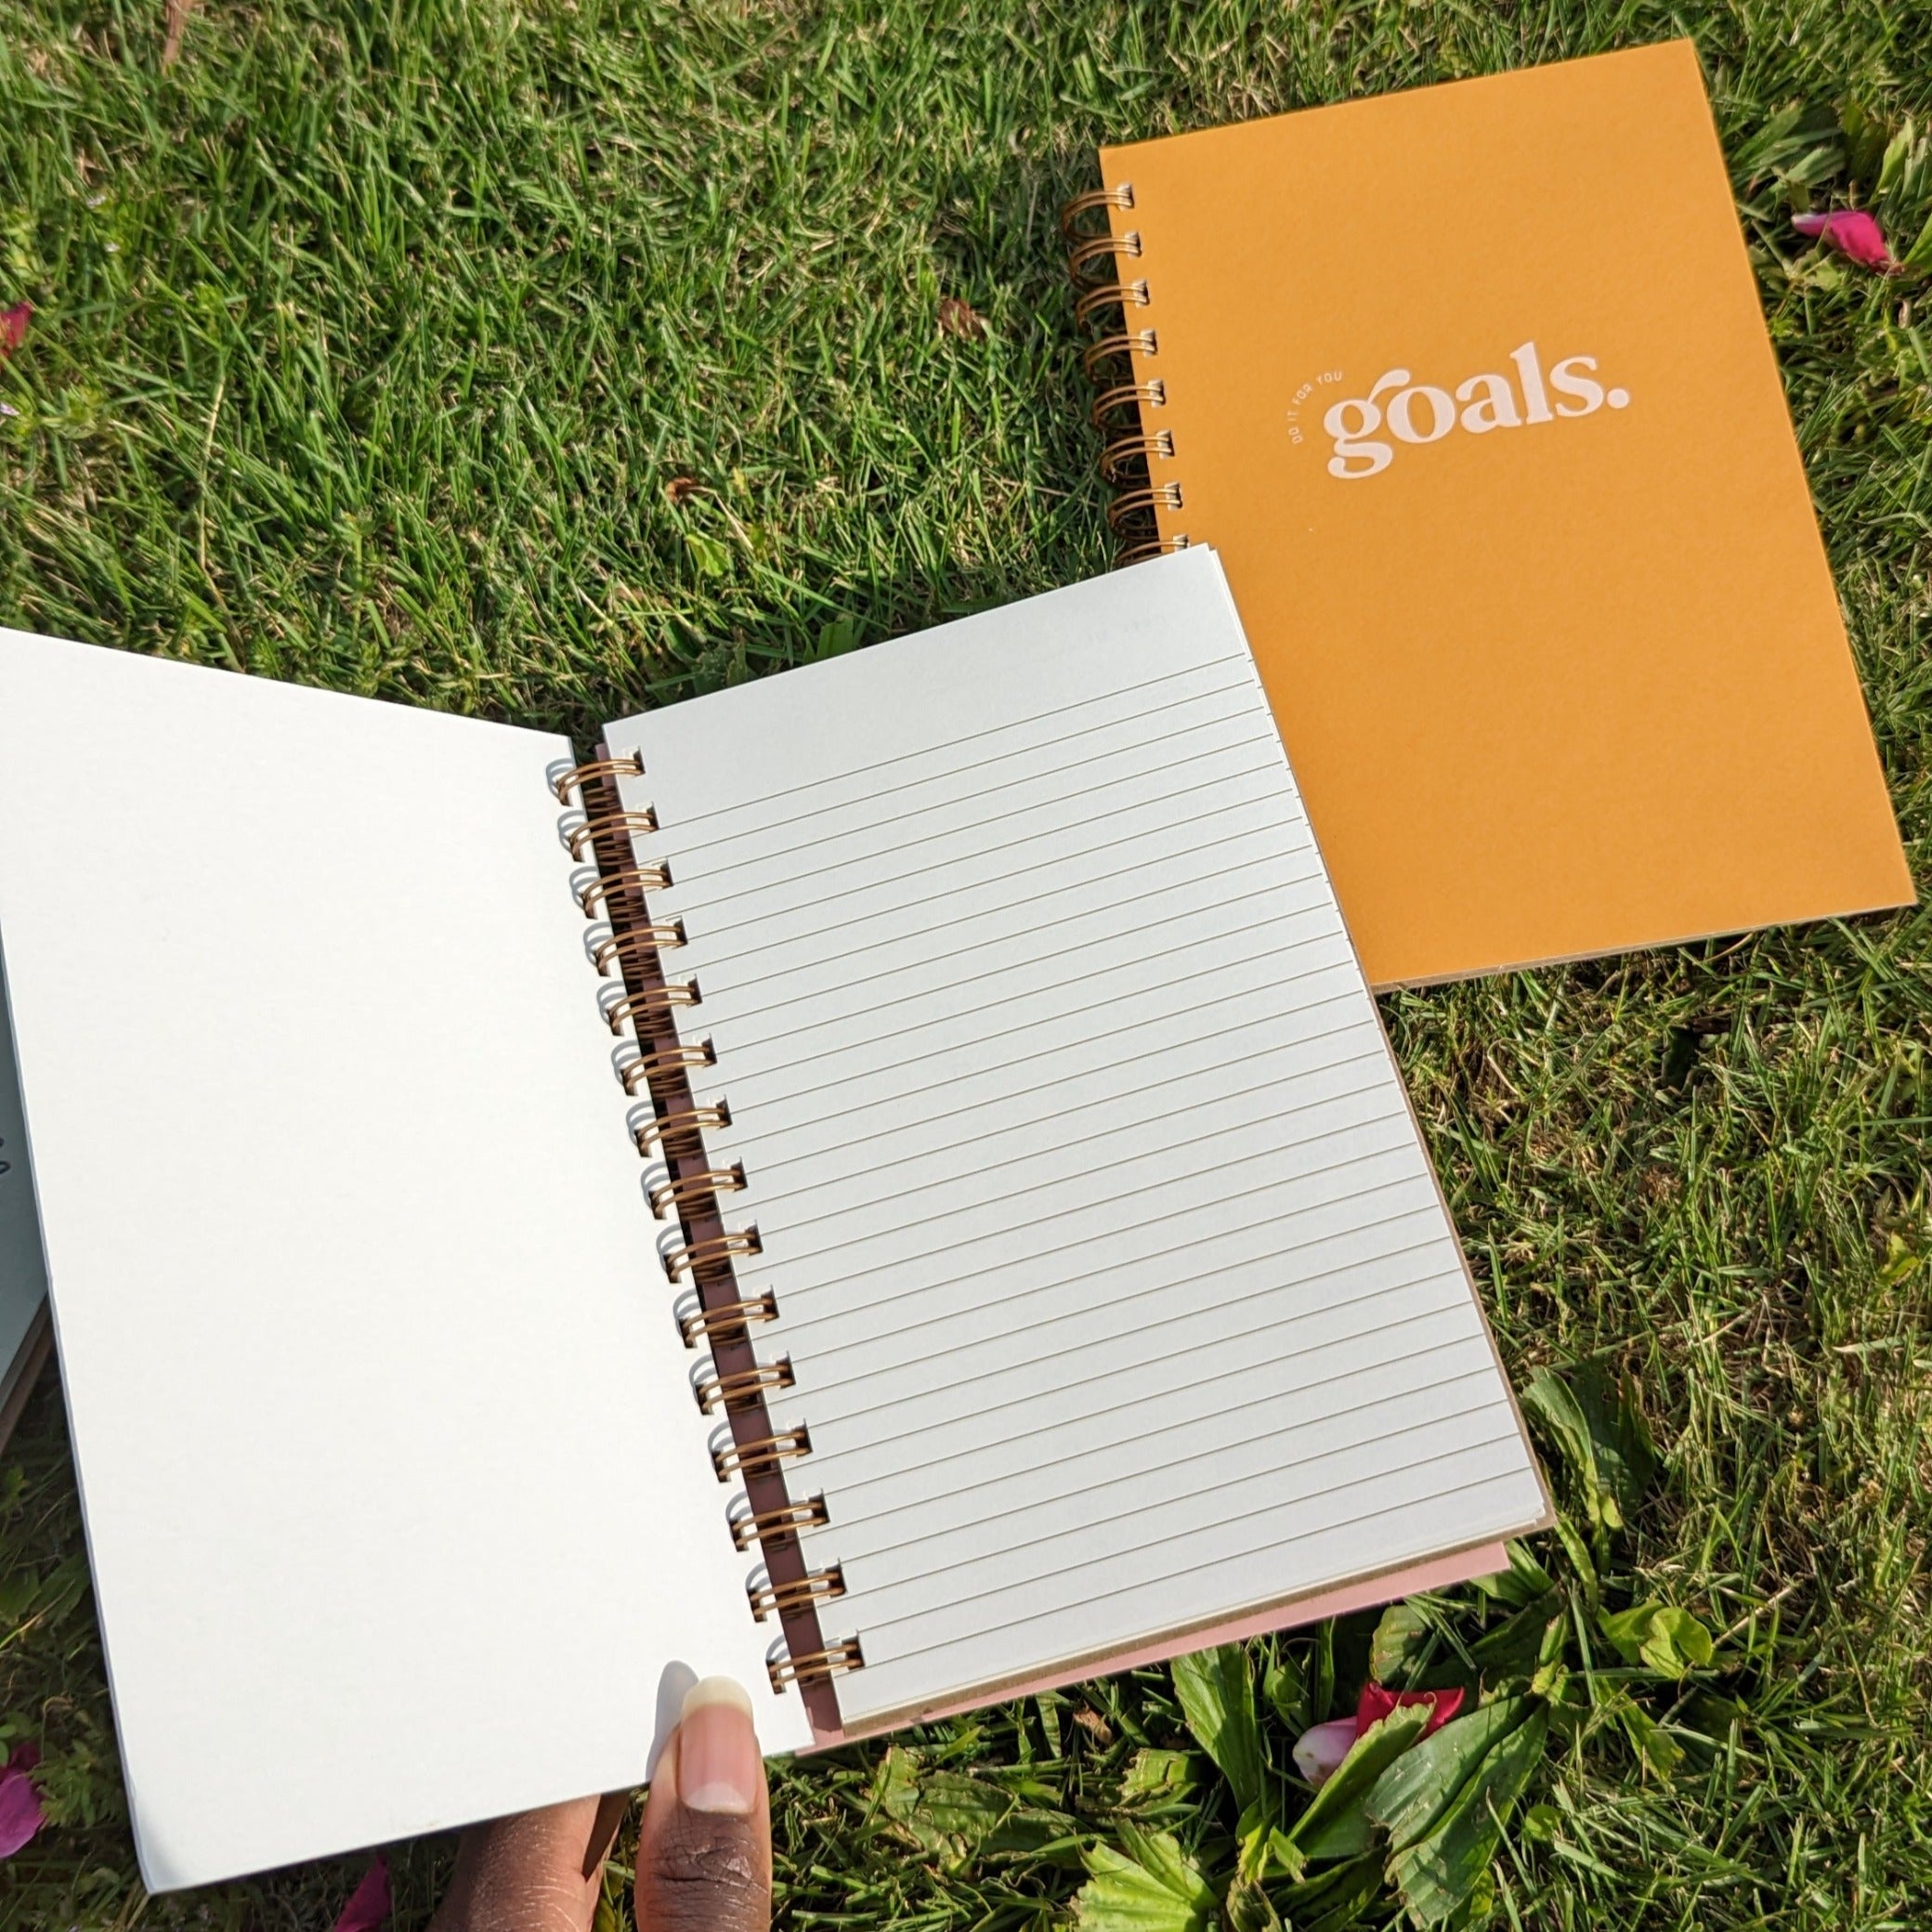 Timing Of Your Life Planner Journal